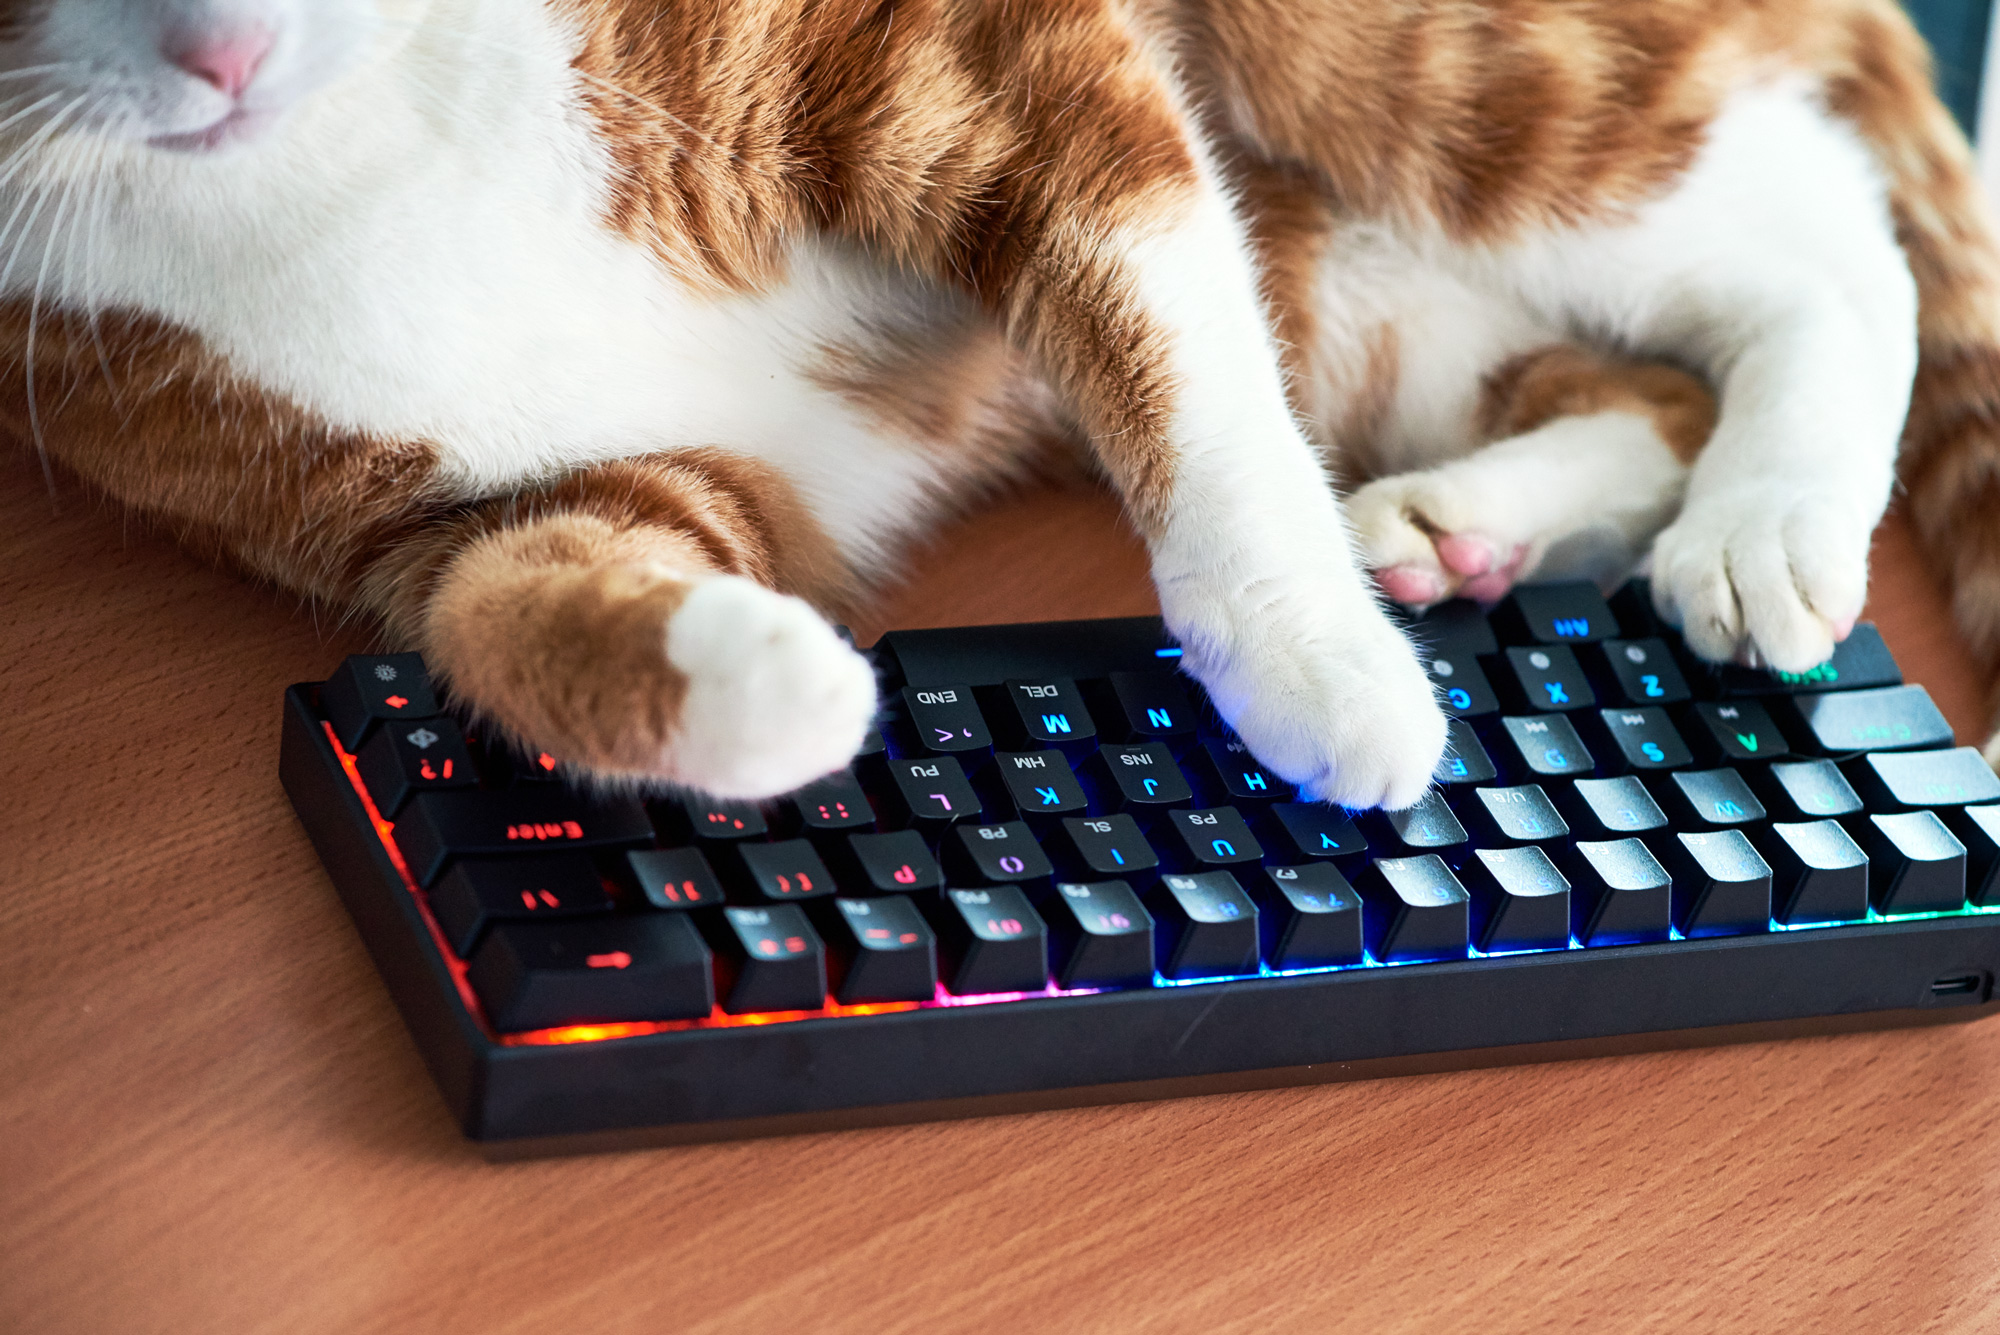 A ginger car pressing on a gaming keyboard